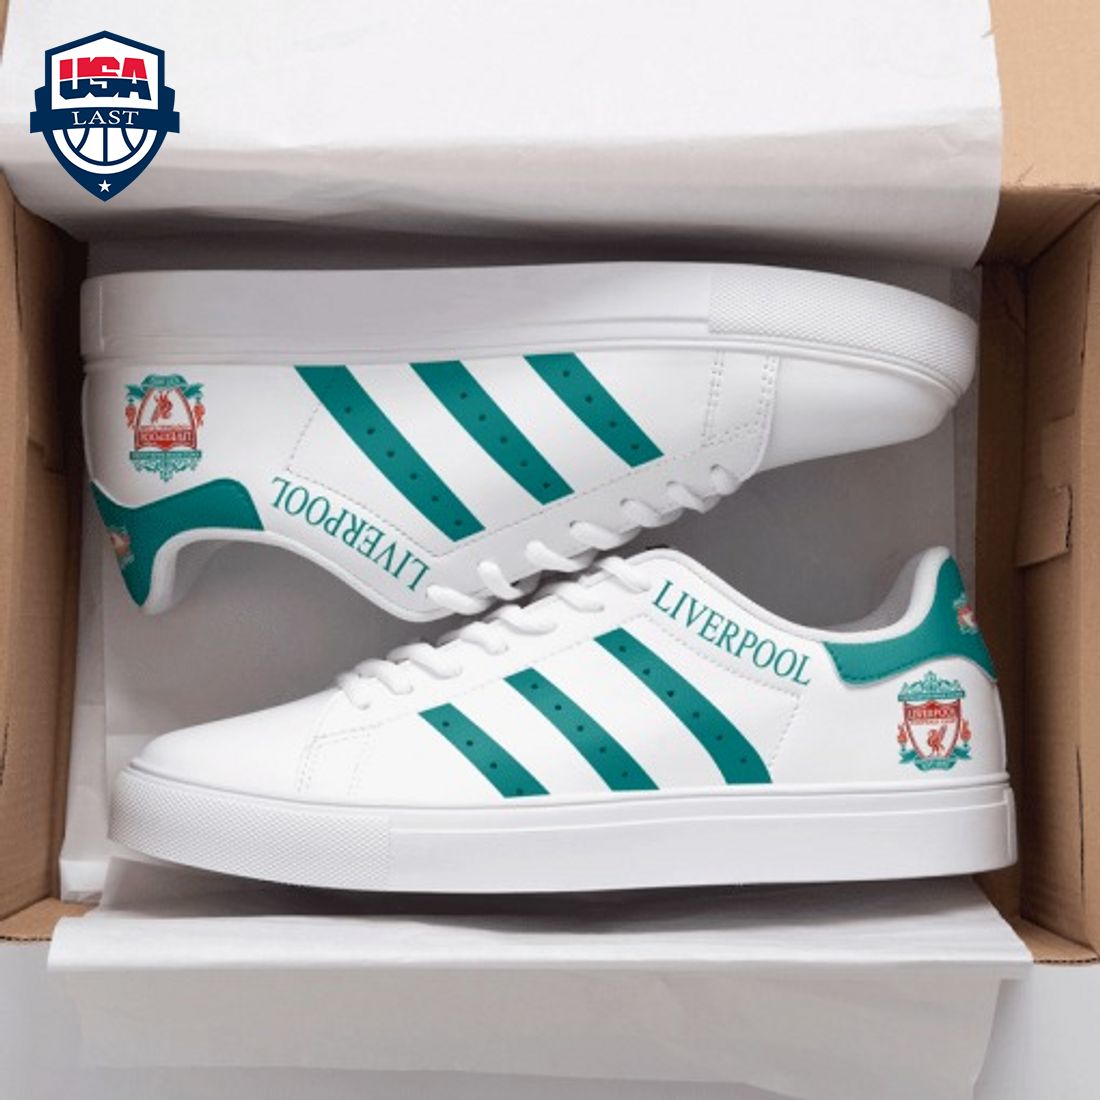 Liverpool FC Teal Stripes Style 1 Stan Smith Low Top Shoes - Looking so nice